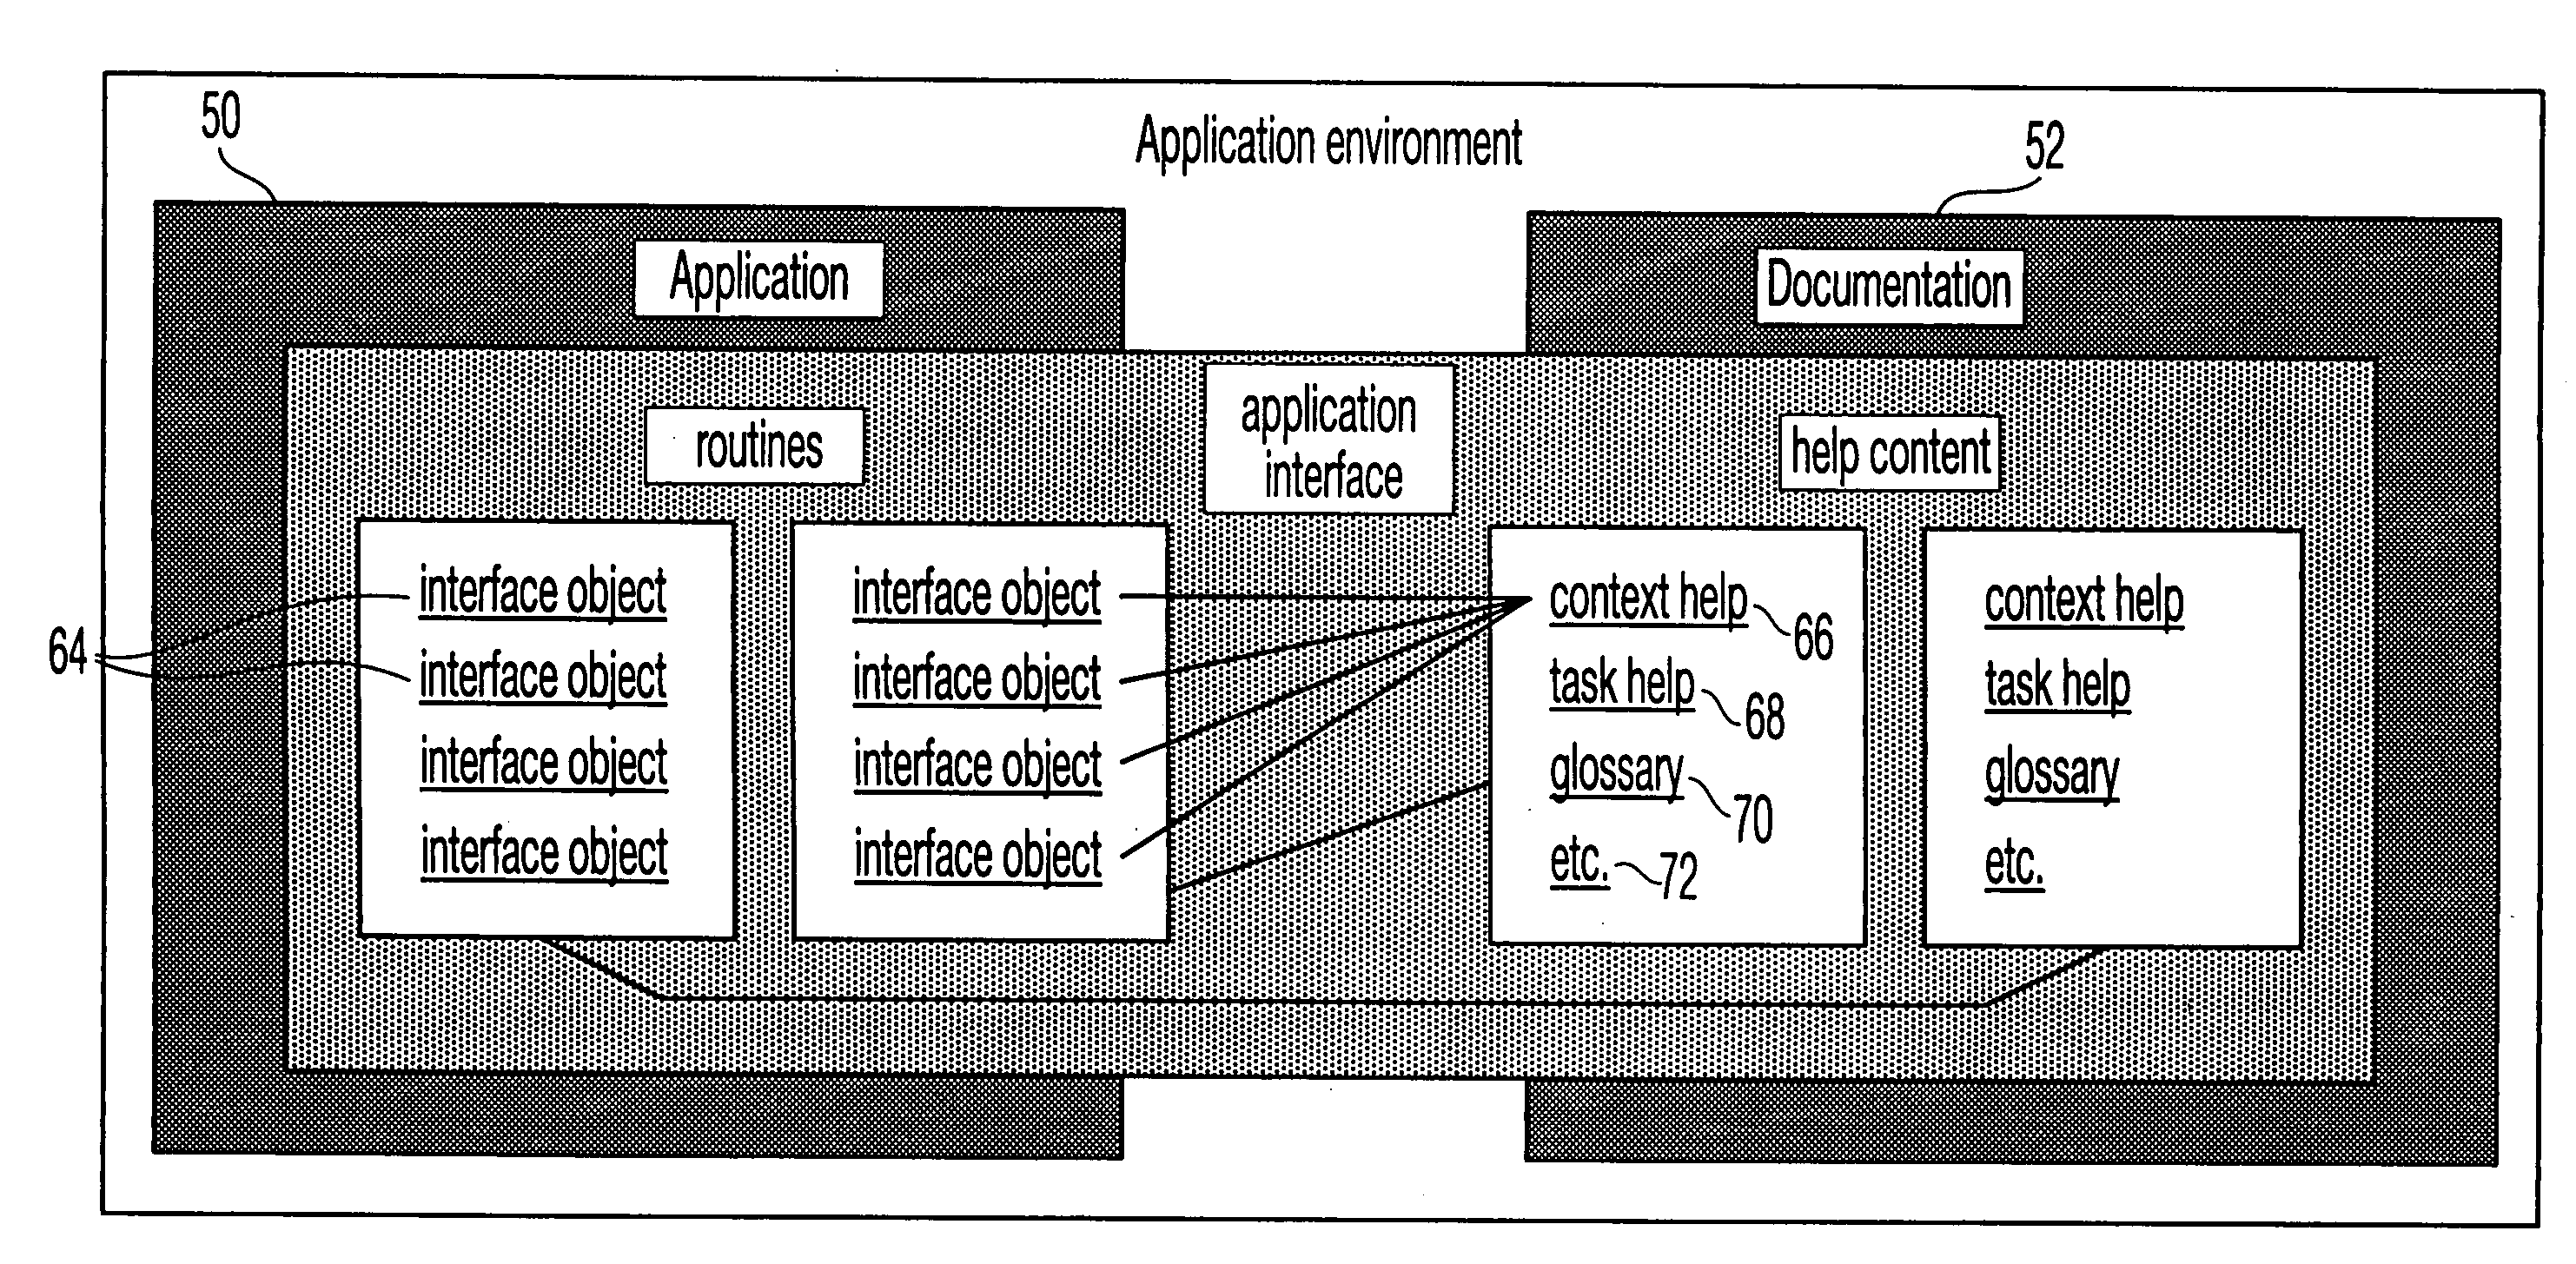 Apparatus and method for integrated software documentation